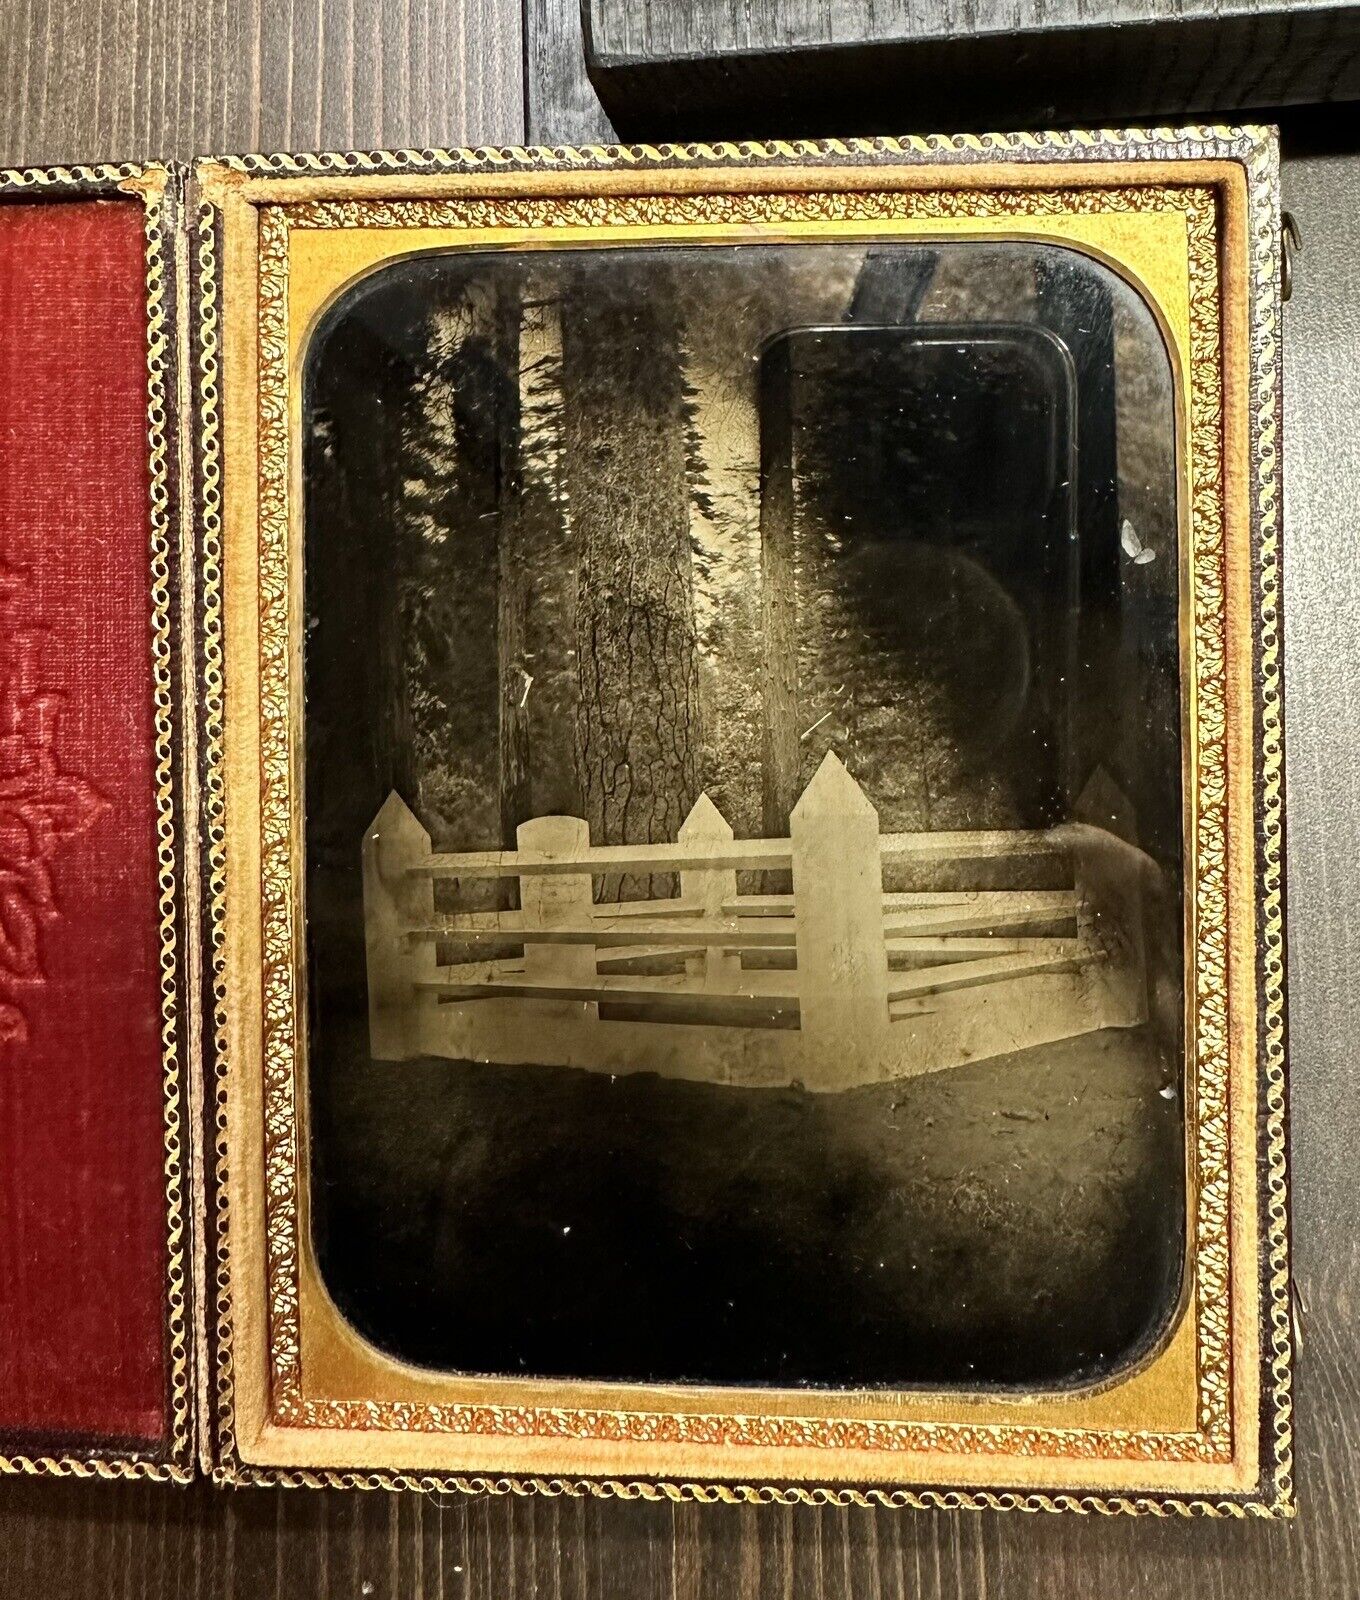 Rare Large 1850s Ambrotype of a Wooded Cemetery / Graveyard Photo Antique 1800s